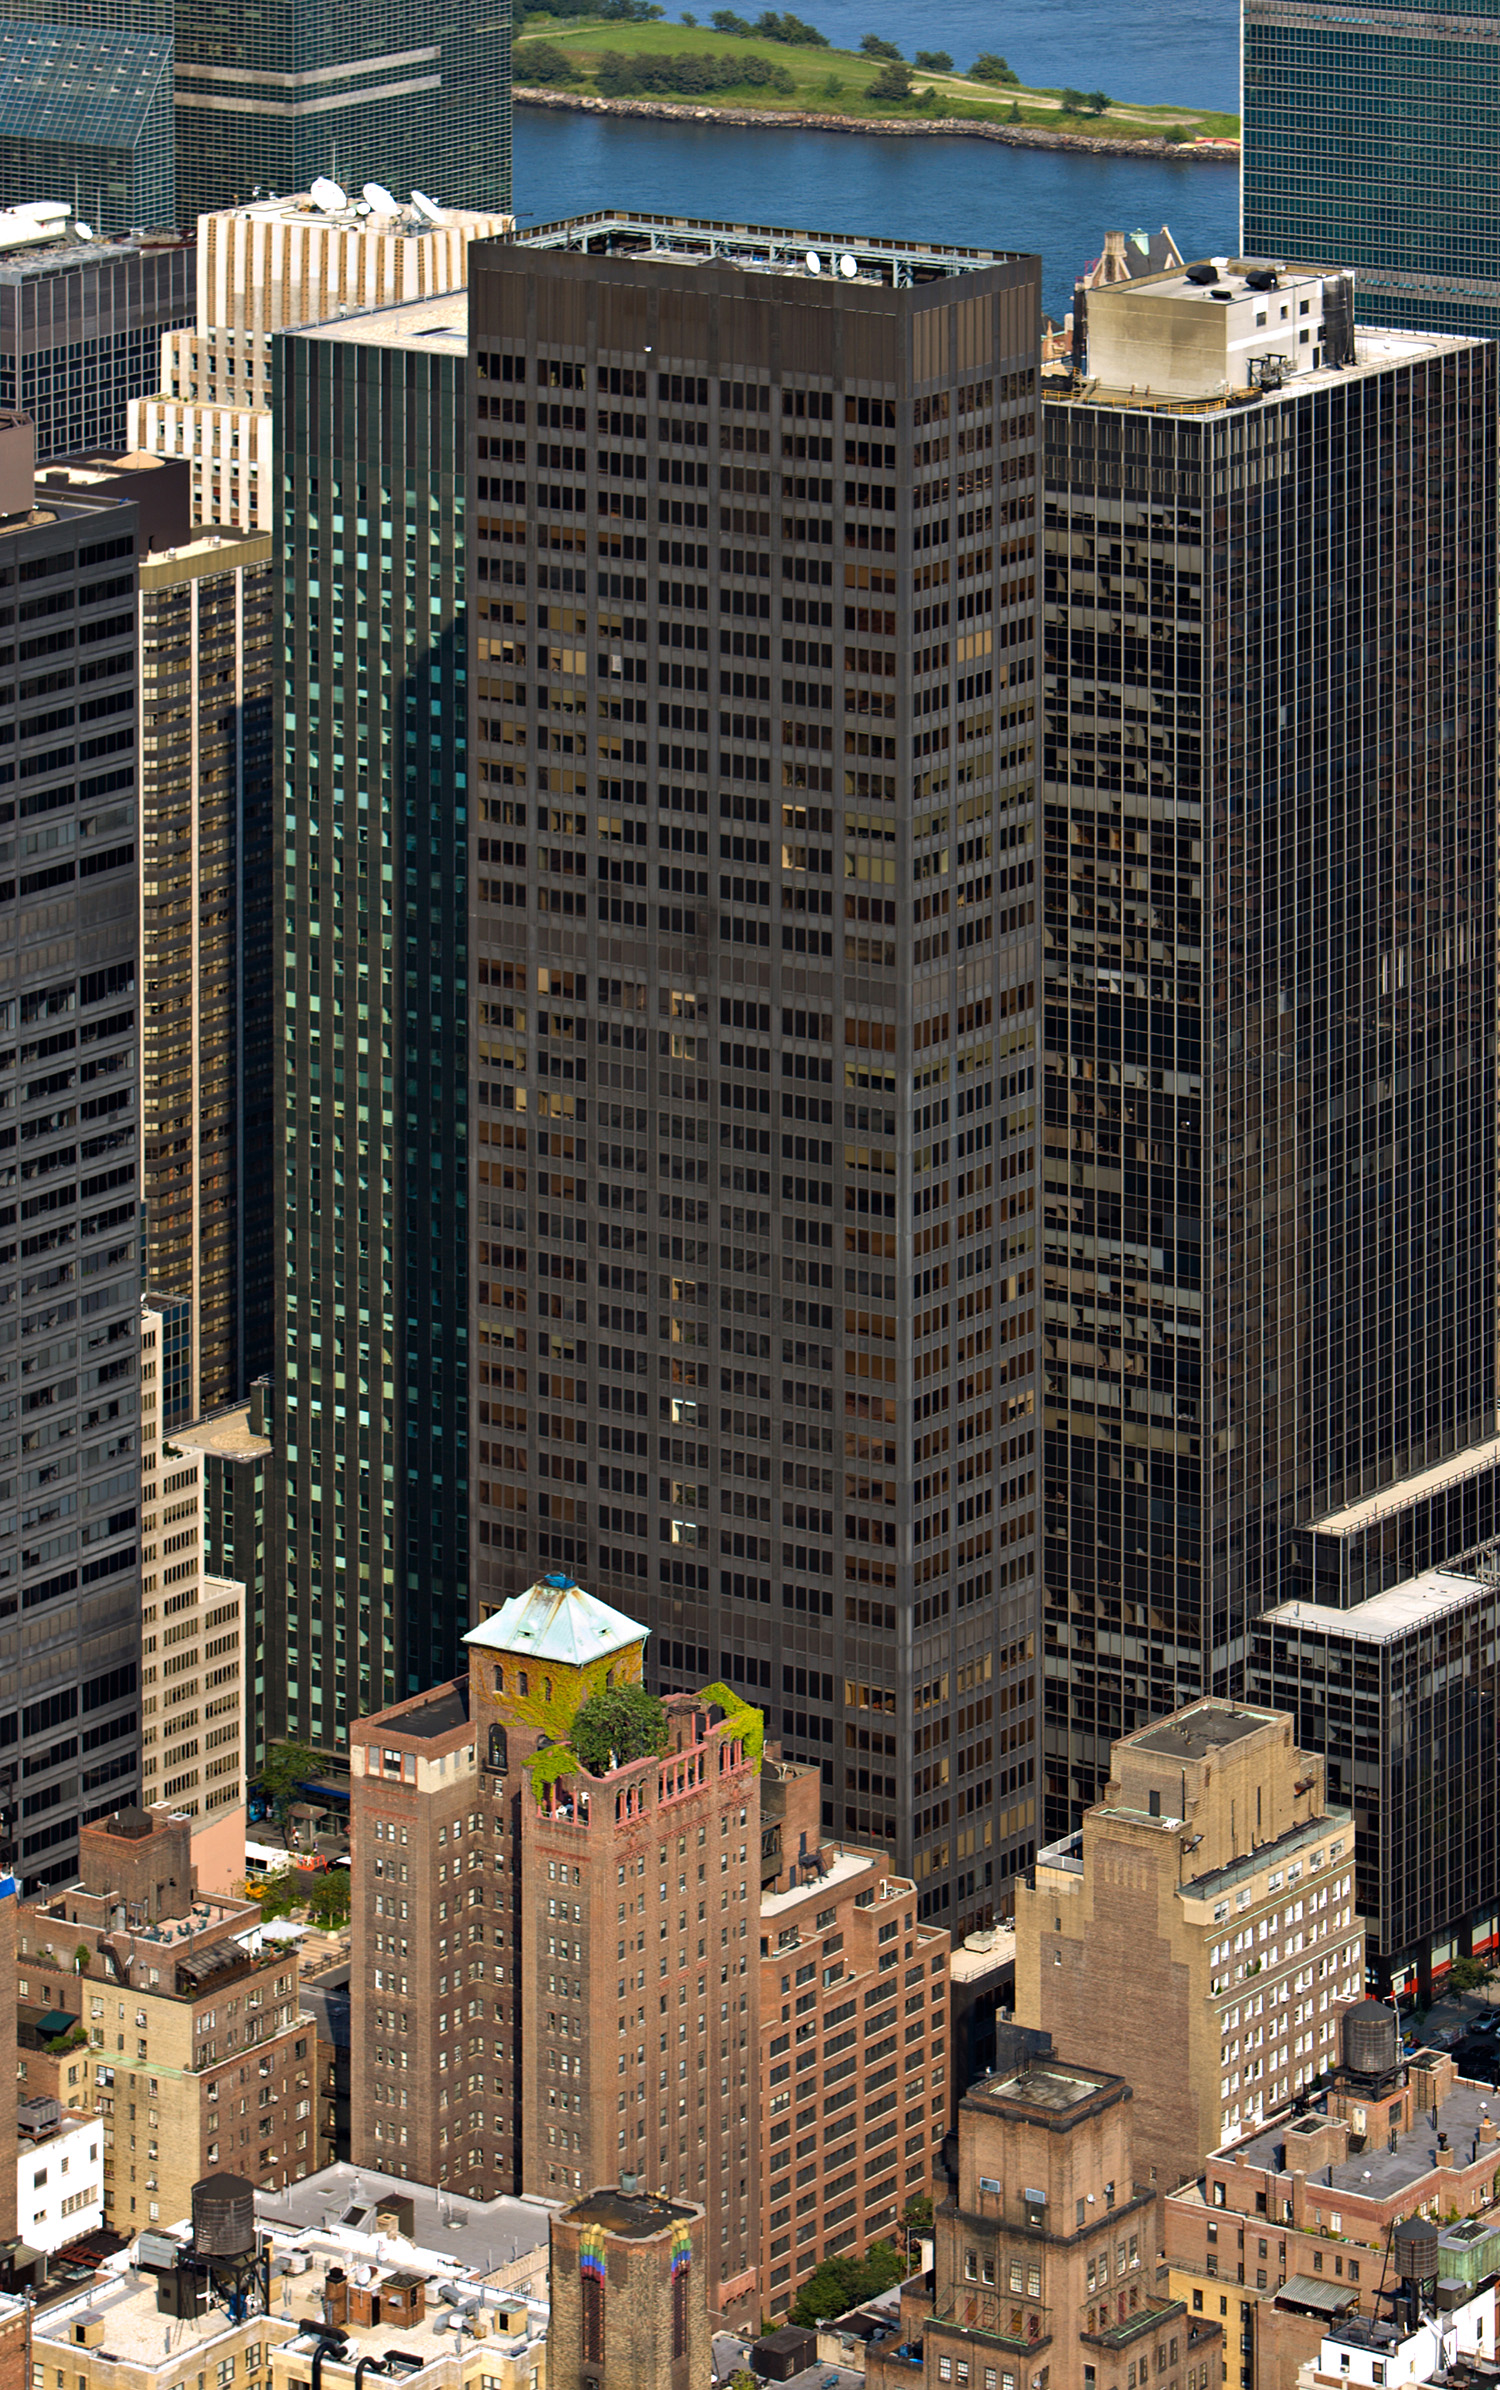 600 Third Avenue, New York City - View from Empire State Building. © Mathias Beinling